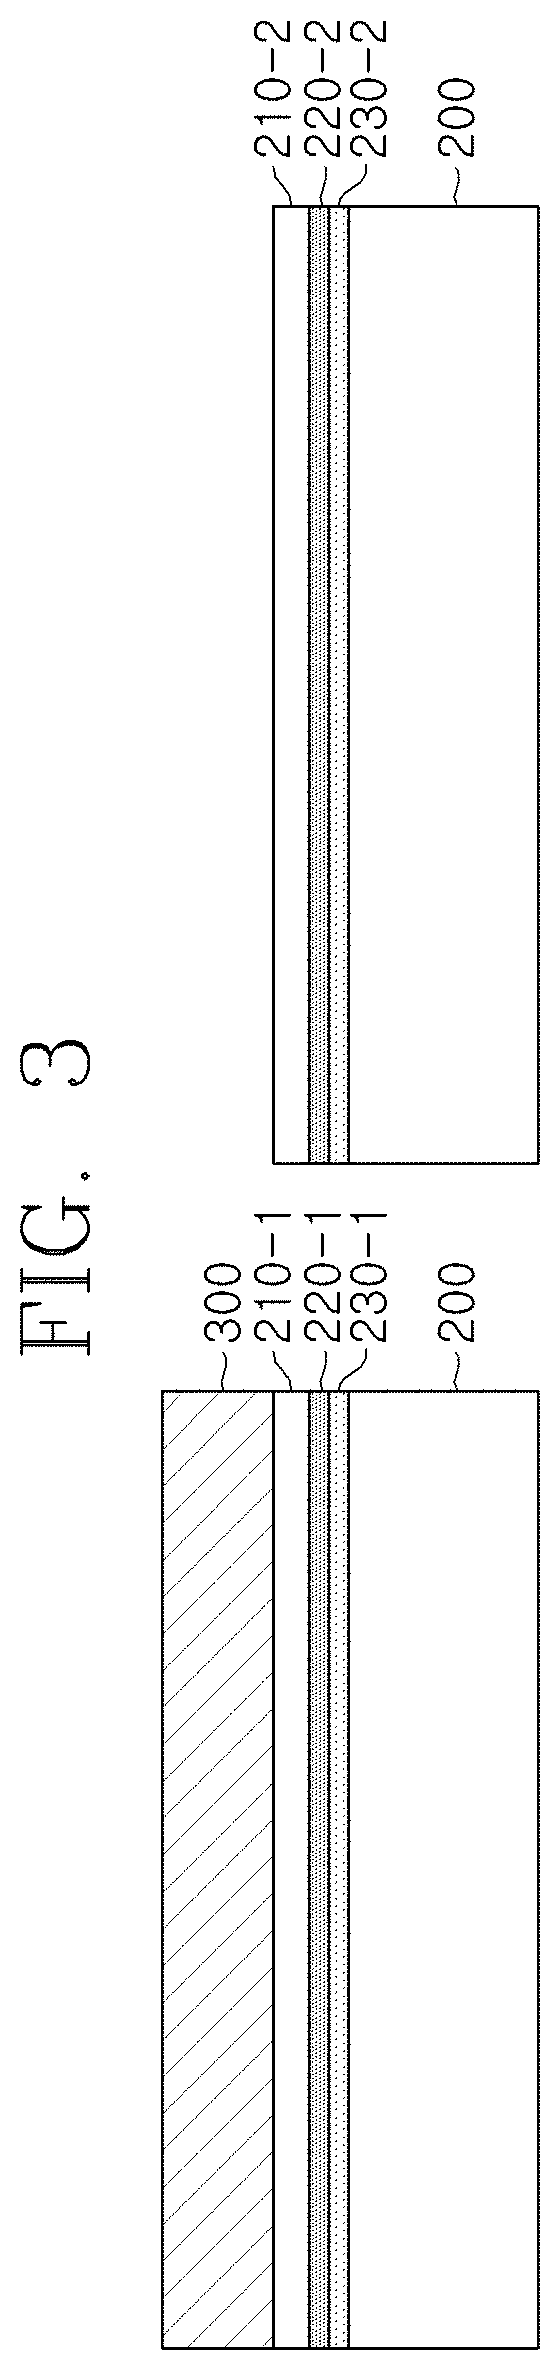 Organic Device Having Protective Film and Method of Manufacturing the Same